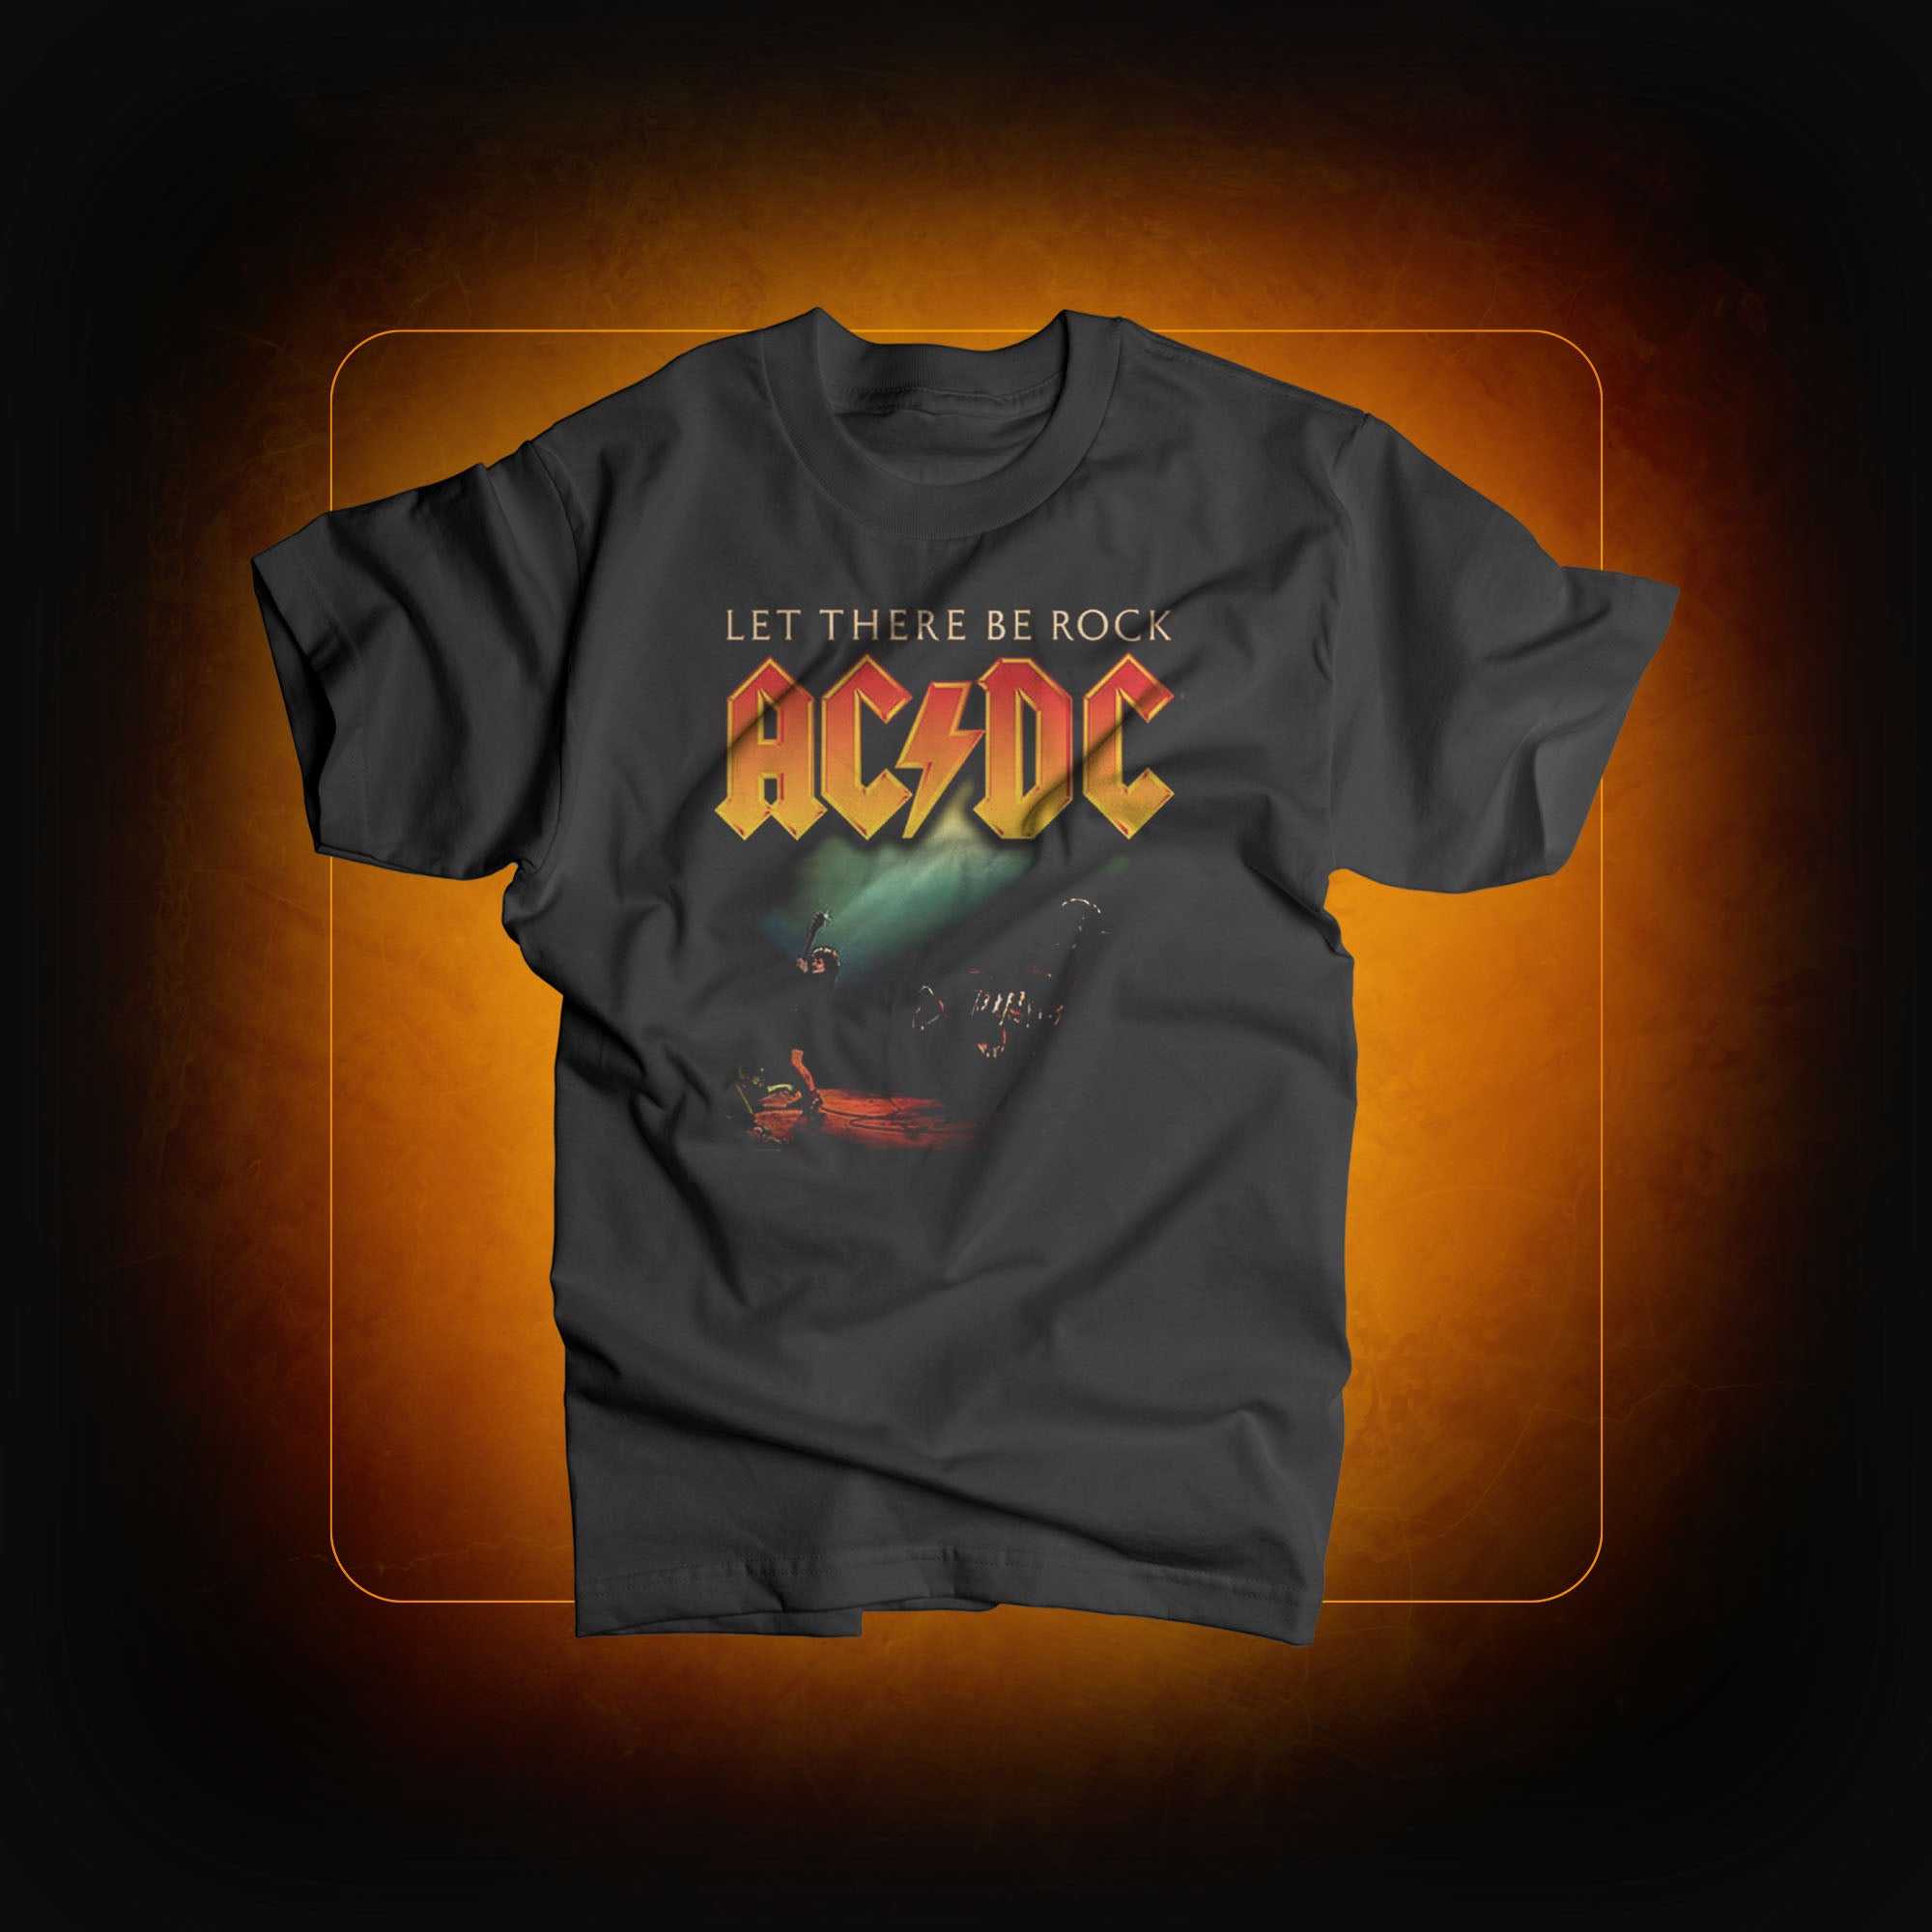 Black Let there be Rock t-shirt - AC/DC